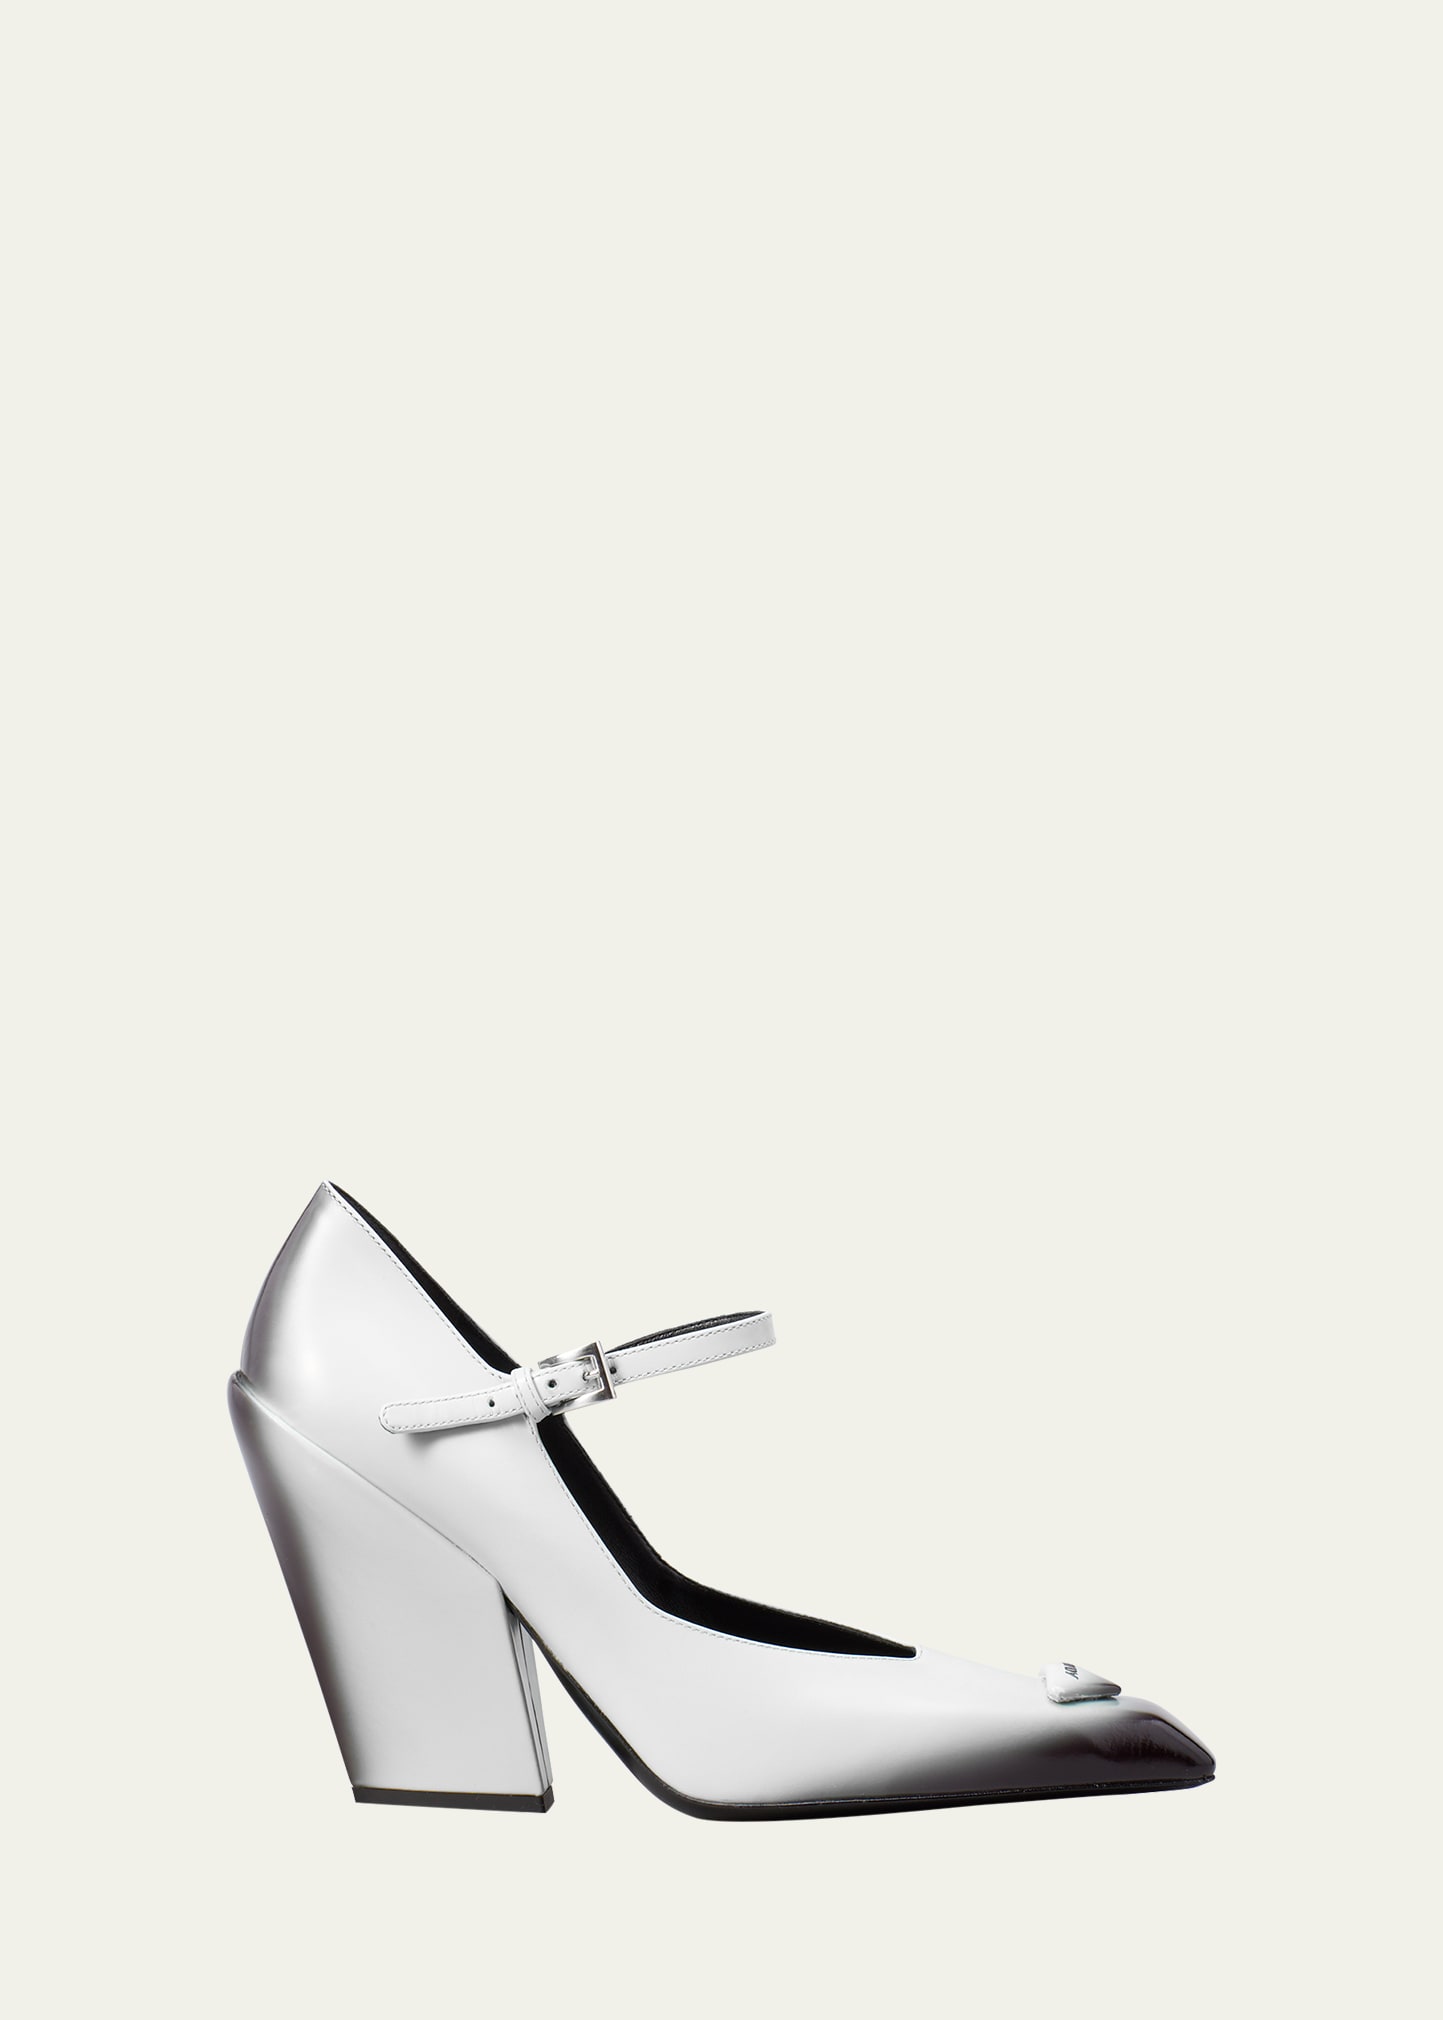 Prada Modellerie Leather Mary Jane Pumps In Bianco